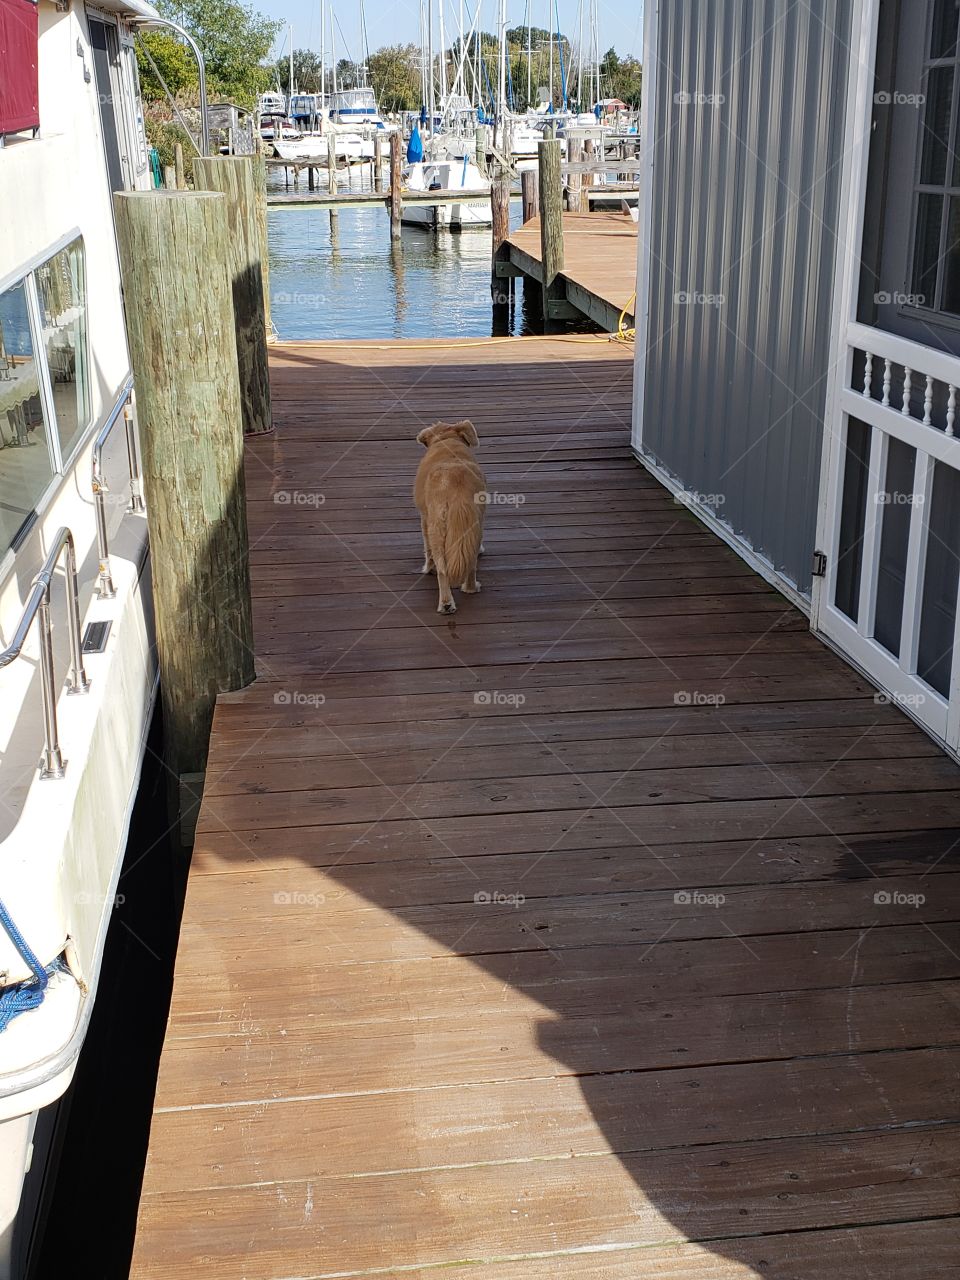 my dog is wondering in the marina by her self